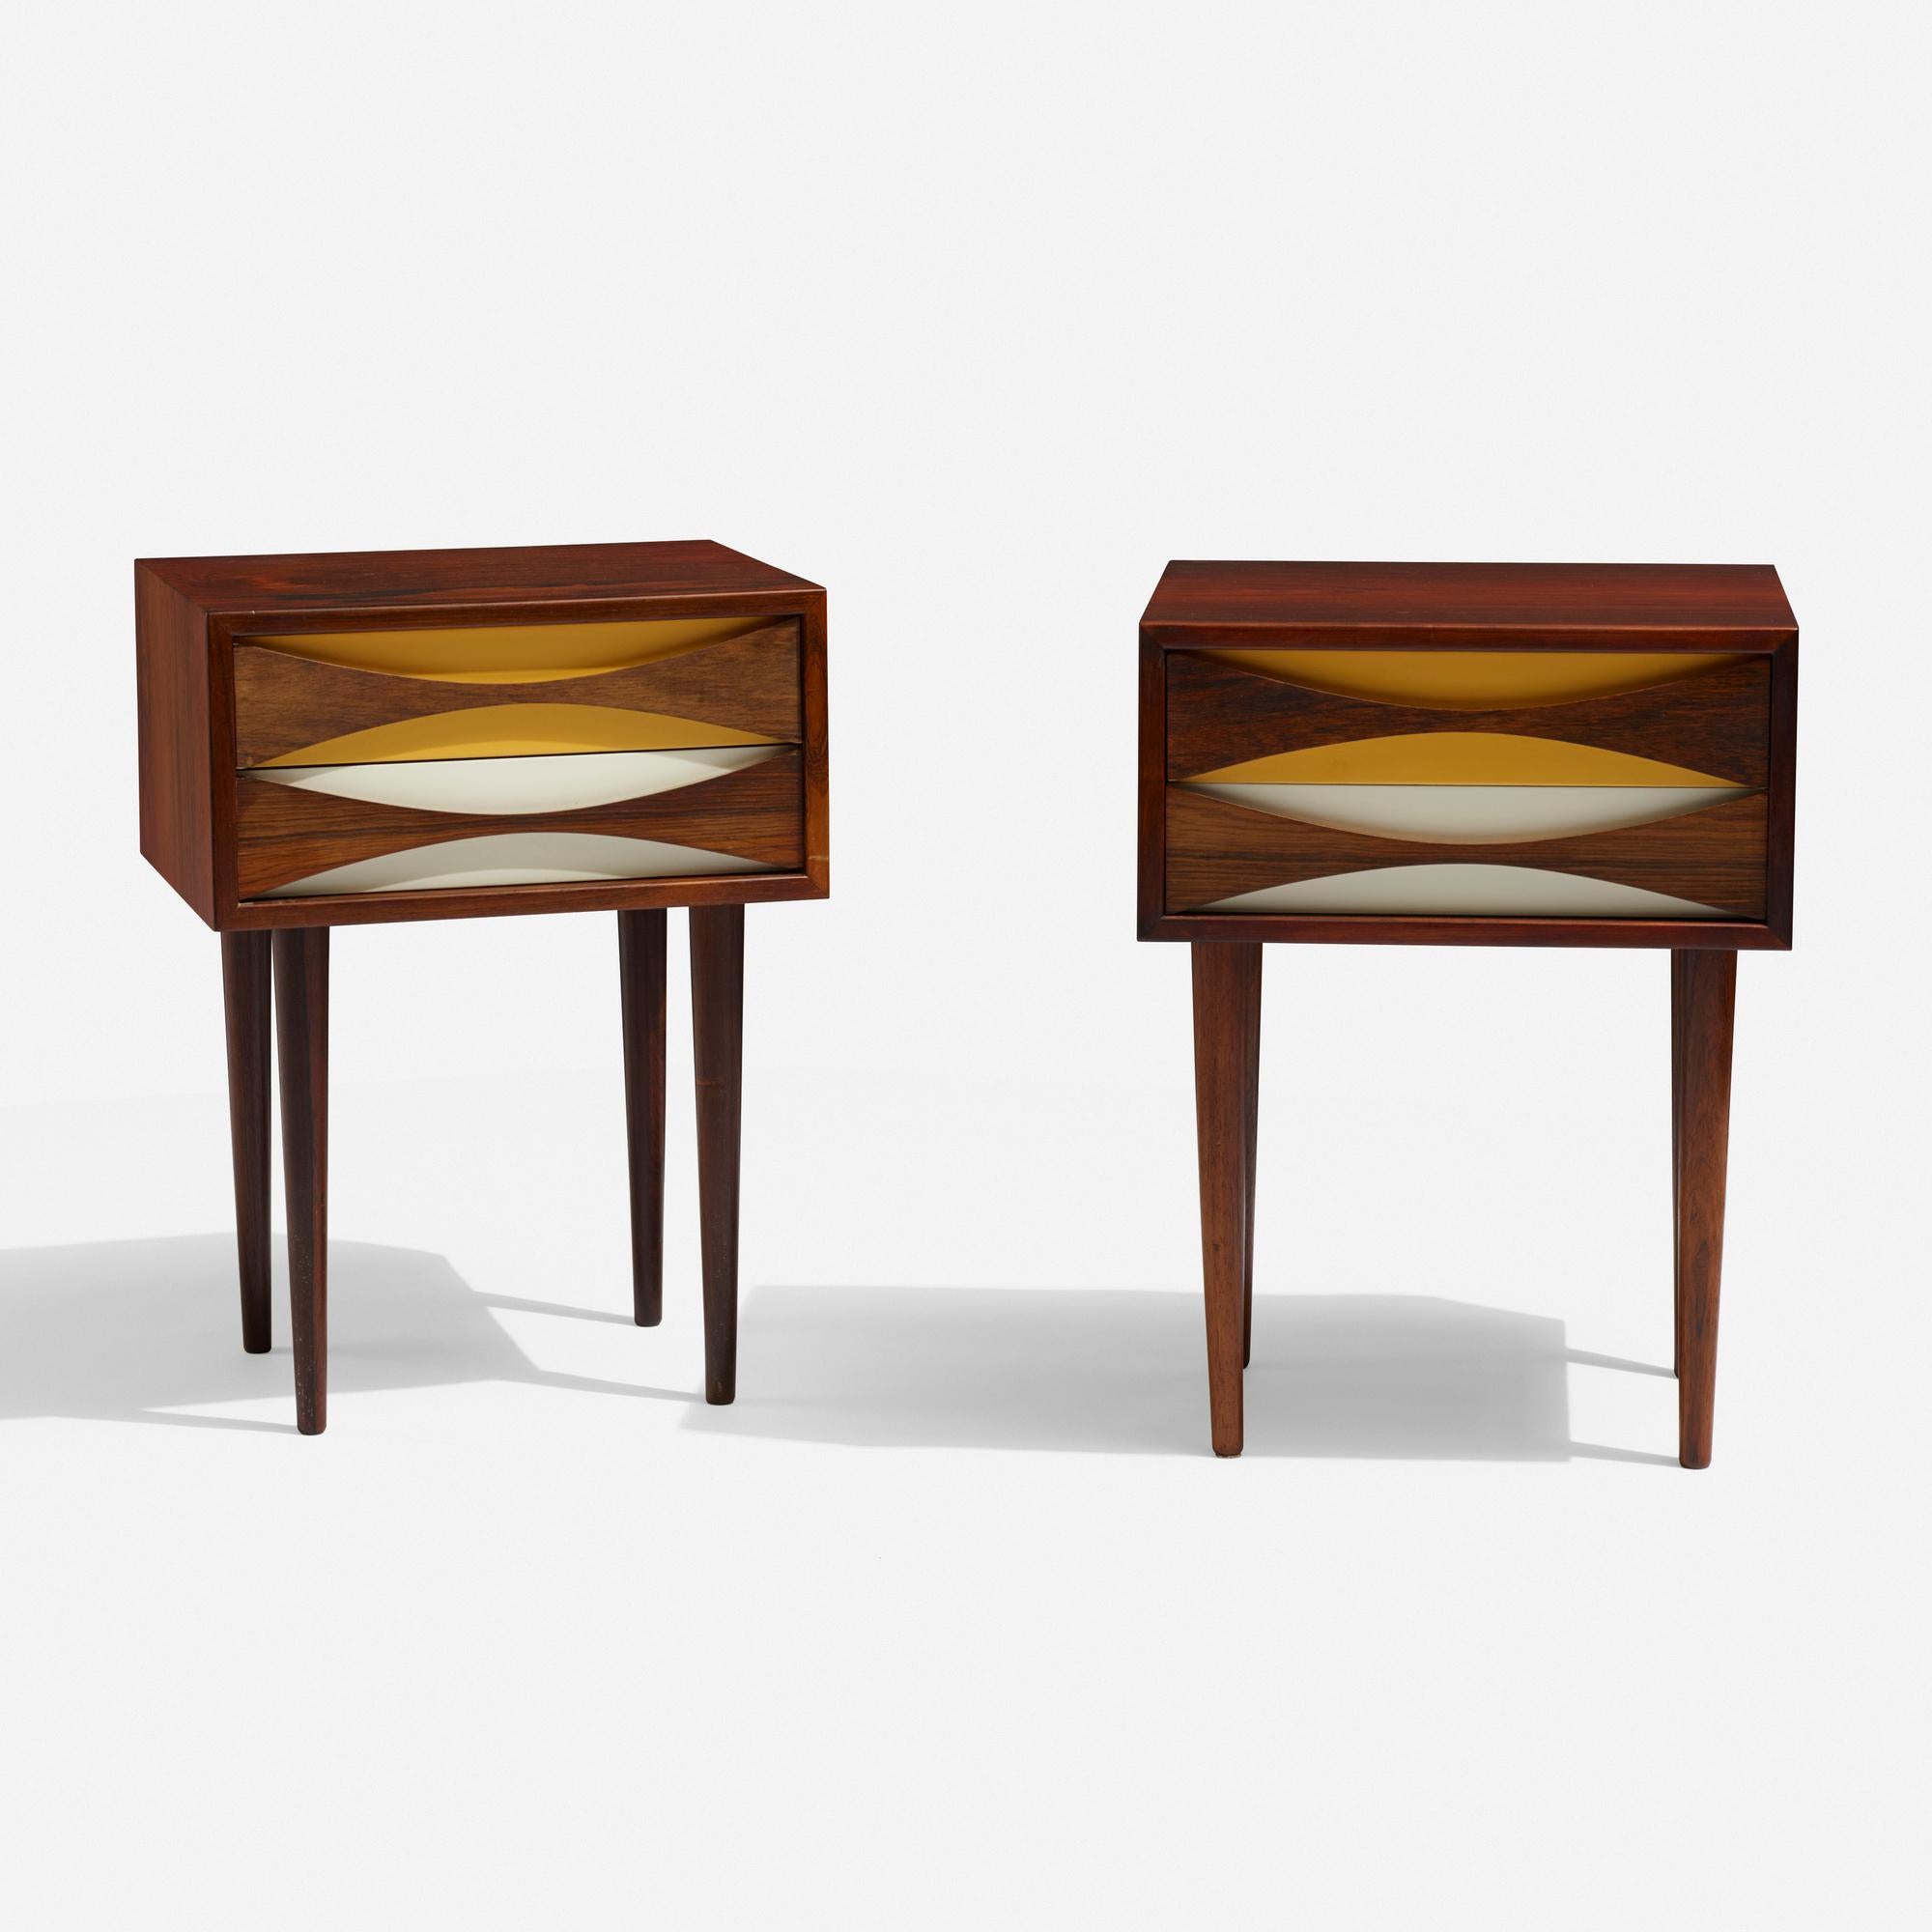 Pair of elegant Niels Clausen nightstands/side tables.
Each nightstand features two drawers.
Rosewood, lacquered wood.